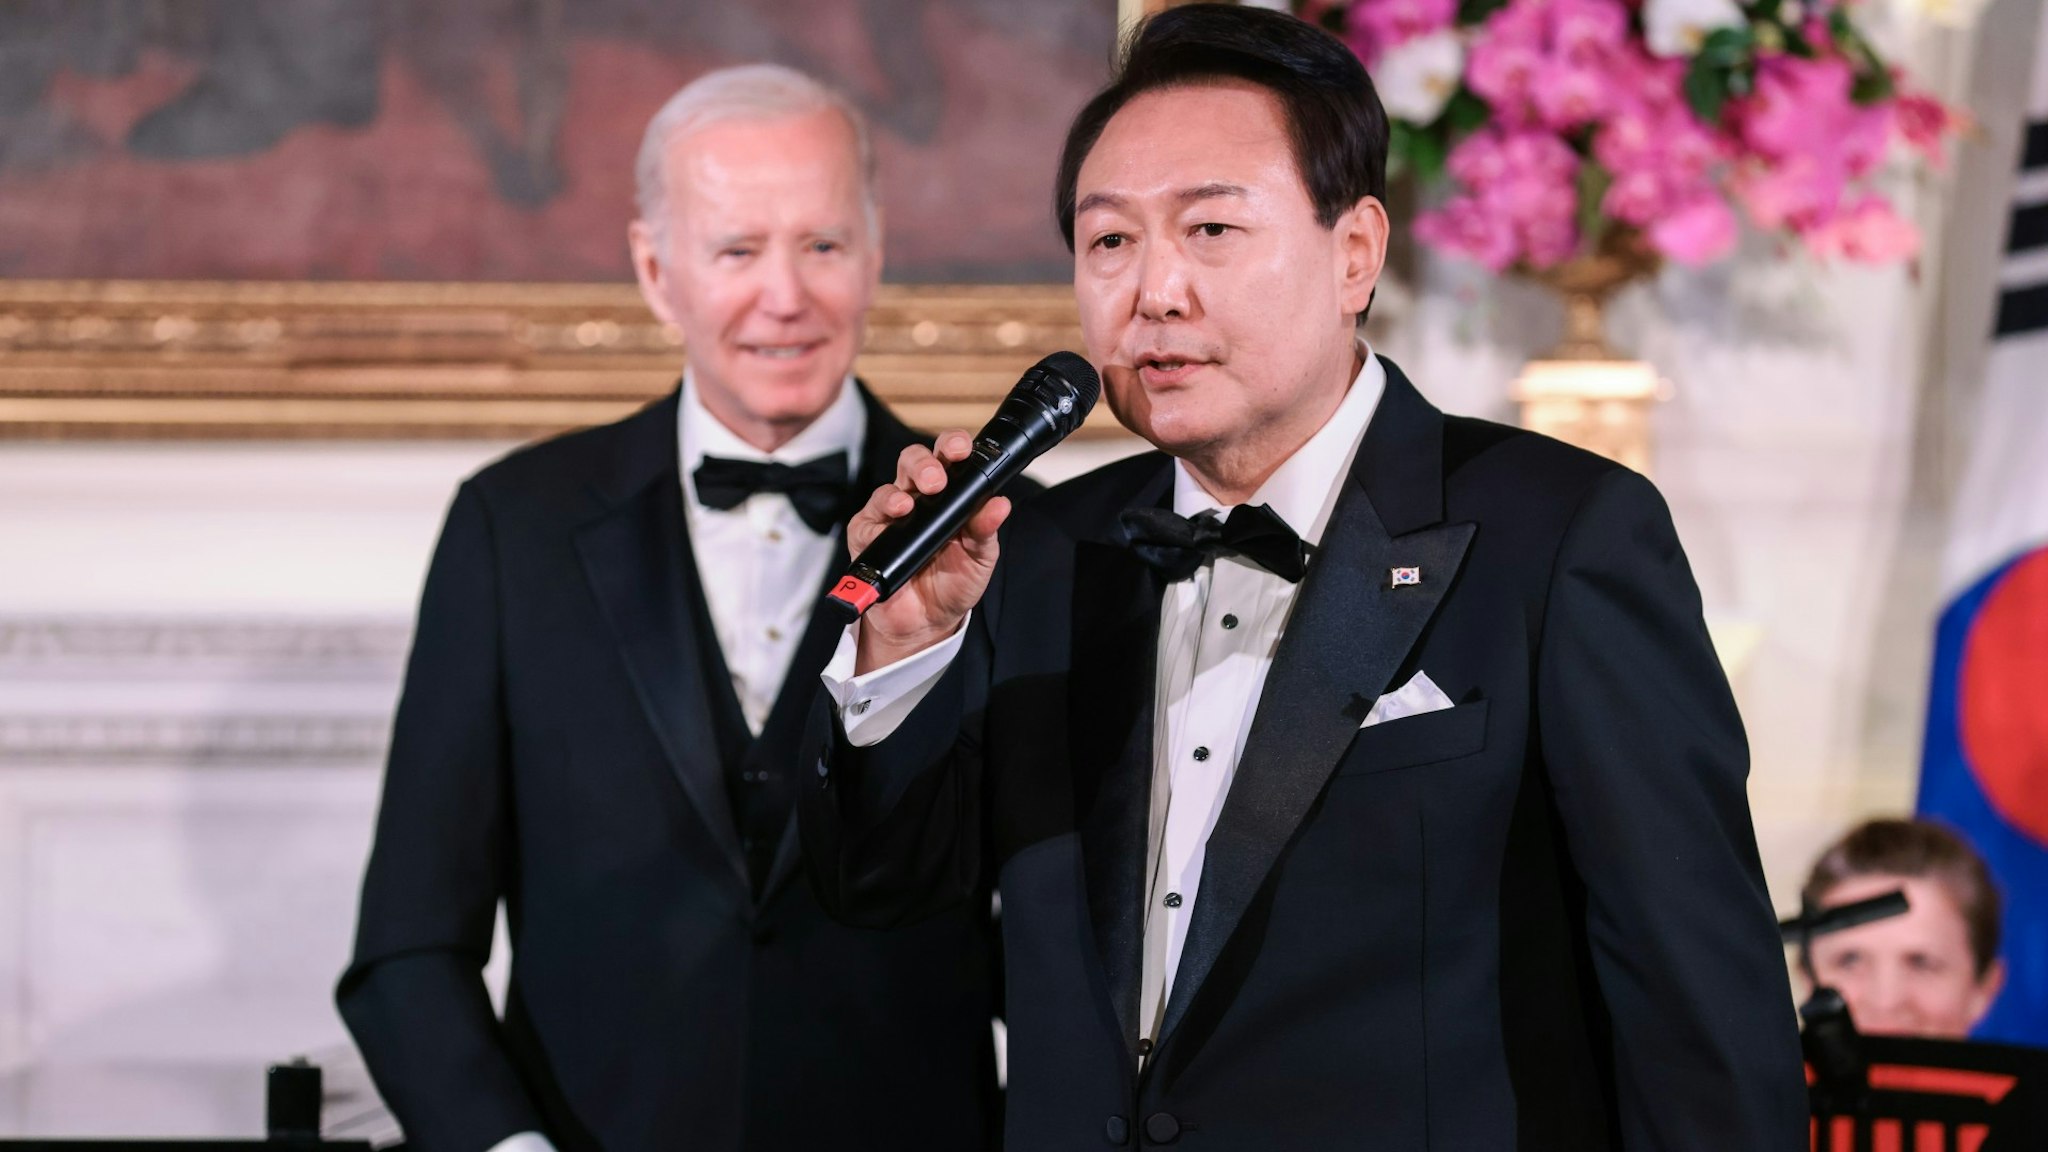 Yoon Suk Yeol, South Korea's president, right, sings during a state dinner with US President Joe Biden, left, at the White House in Washington, DC, US, on Wednesday, April 26, 2023.